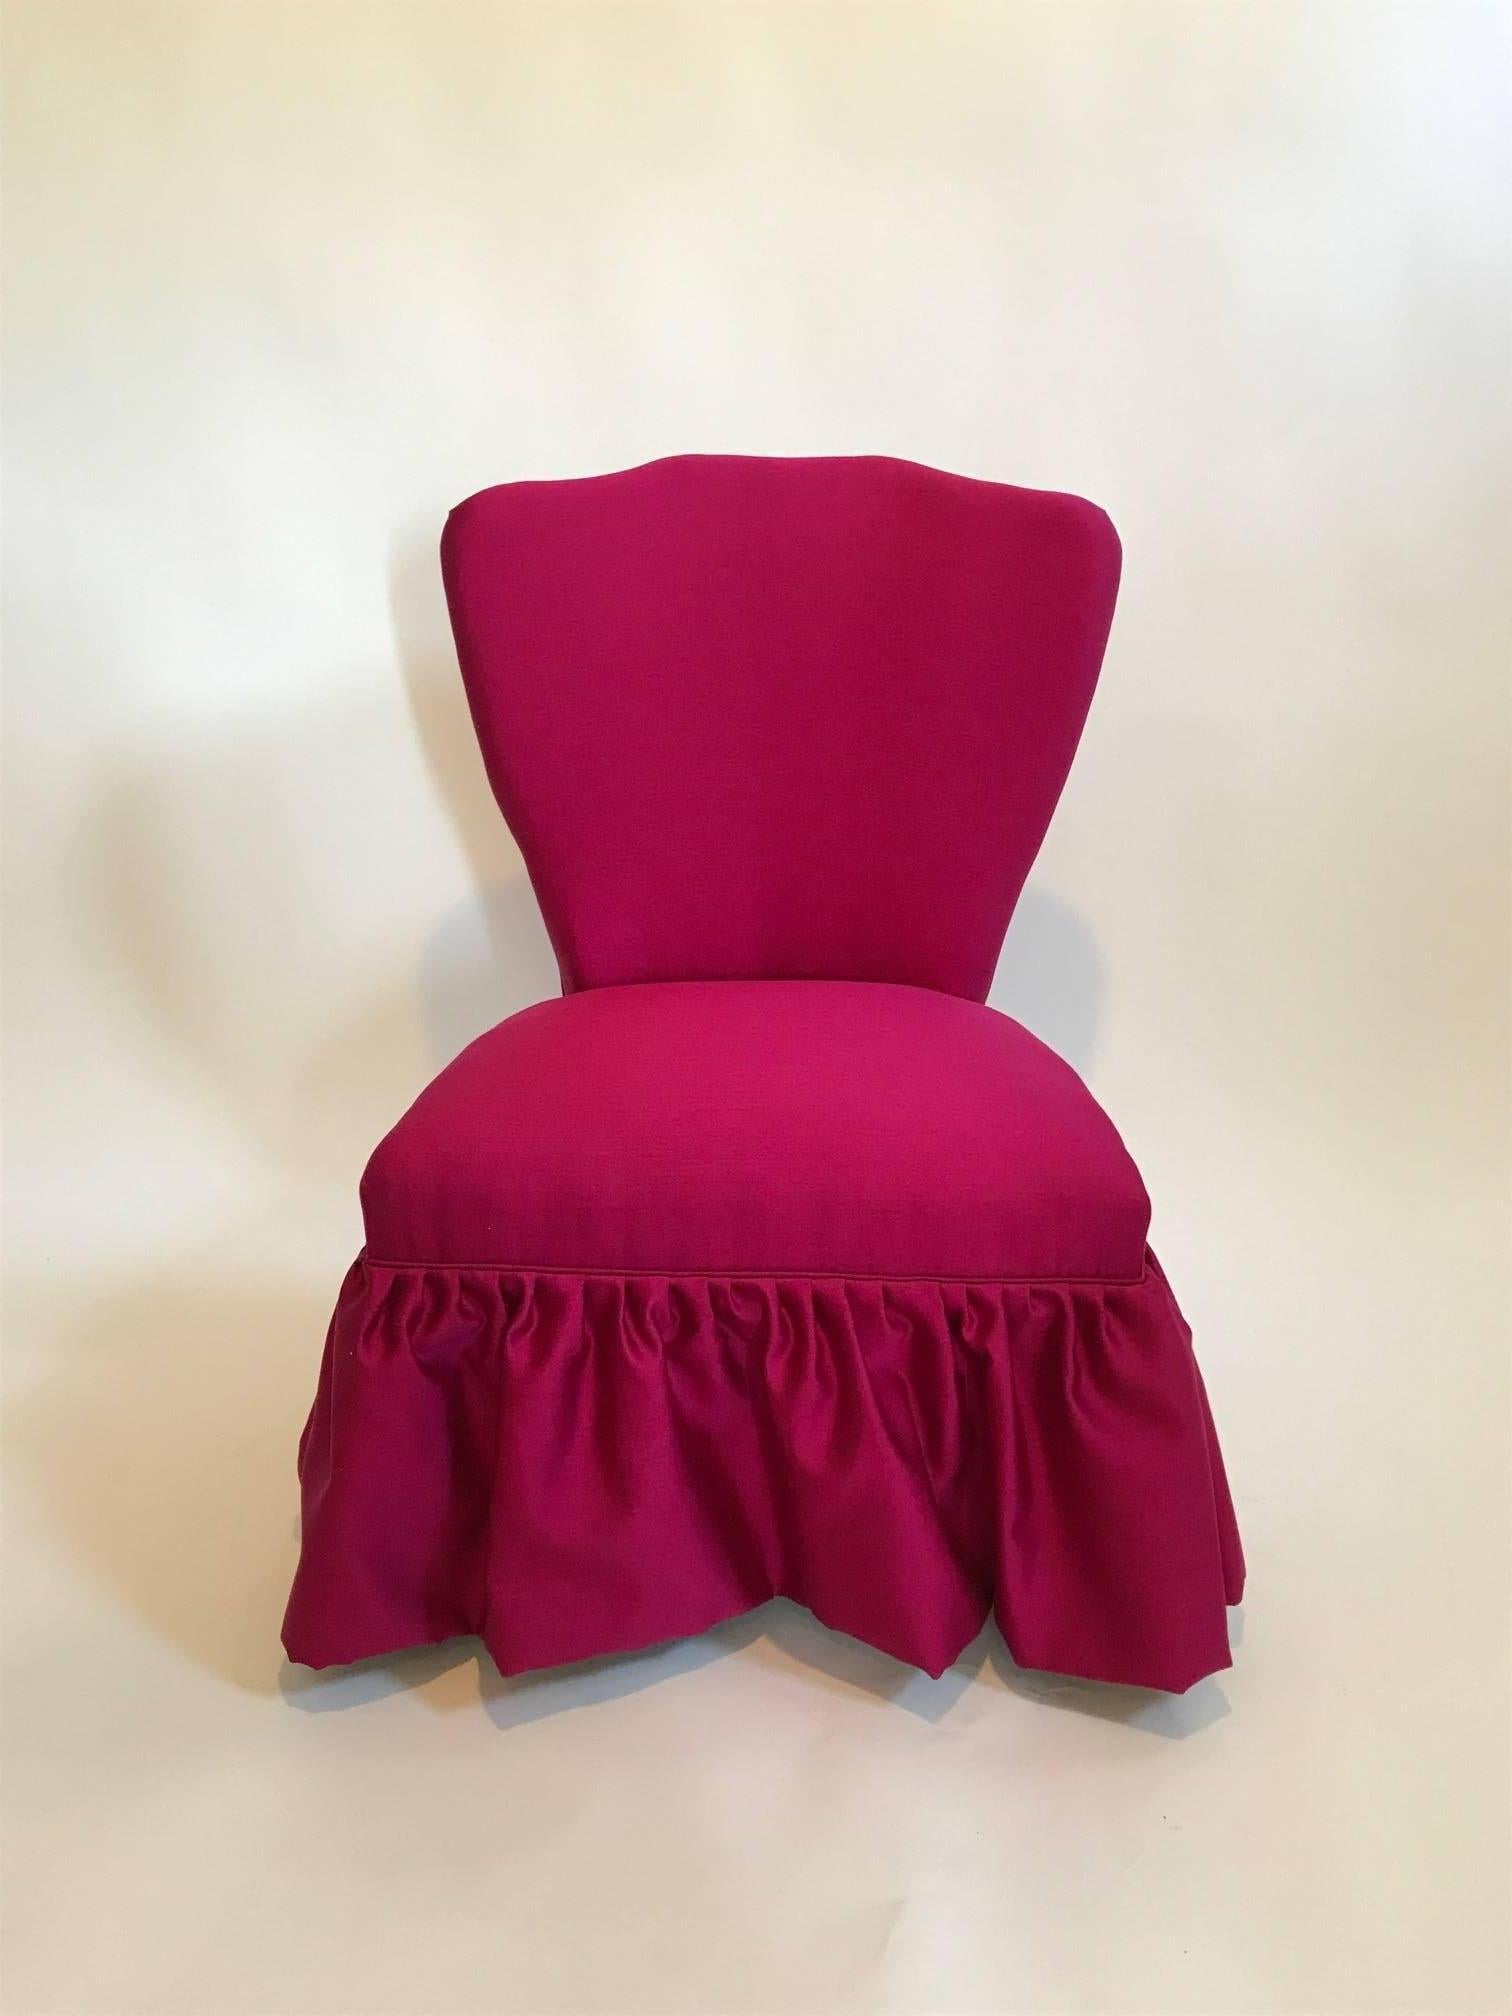 Slipper chair reupholstered in Holland & Sherry wool silk sateen fabric.

Measures: 31.5" H x 20 " W x 22" D x 16.5" SD x 16" SH.